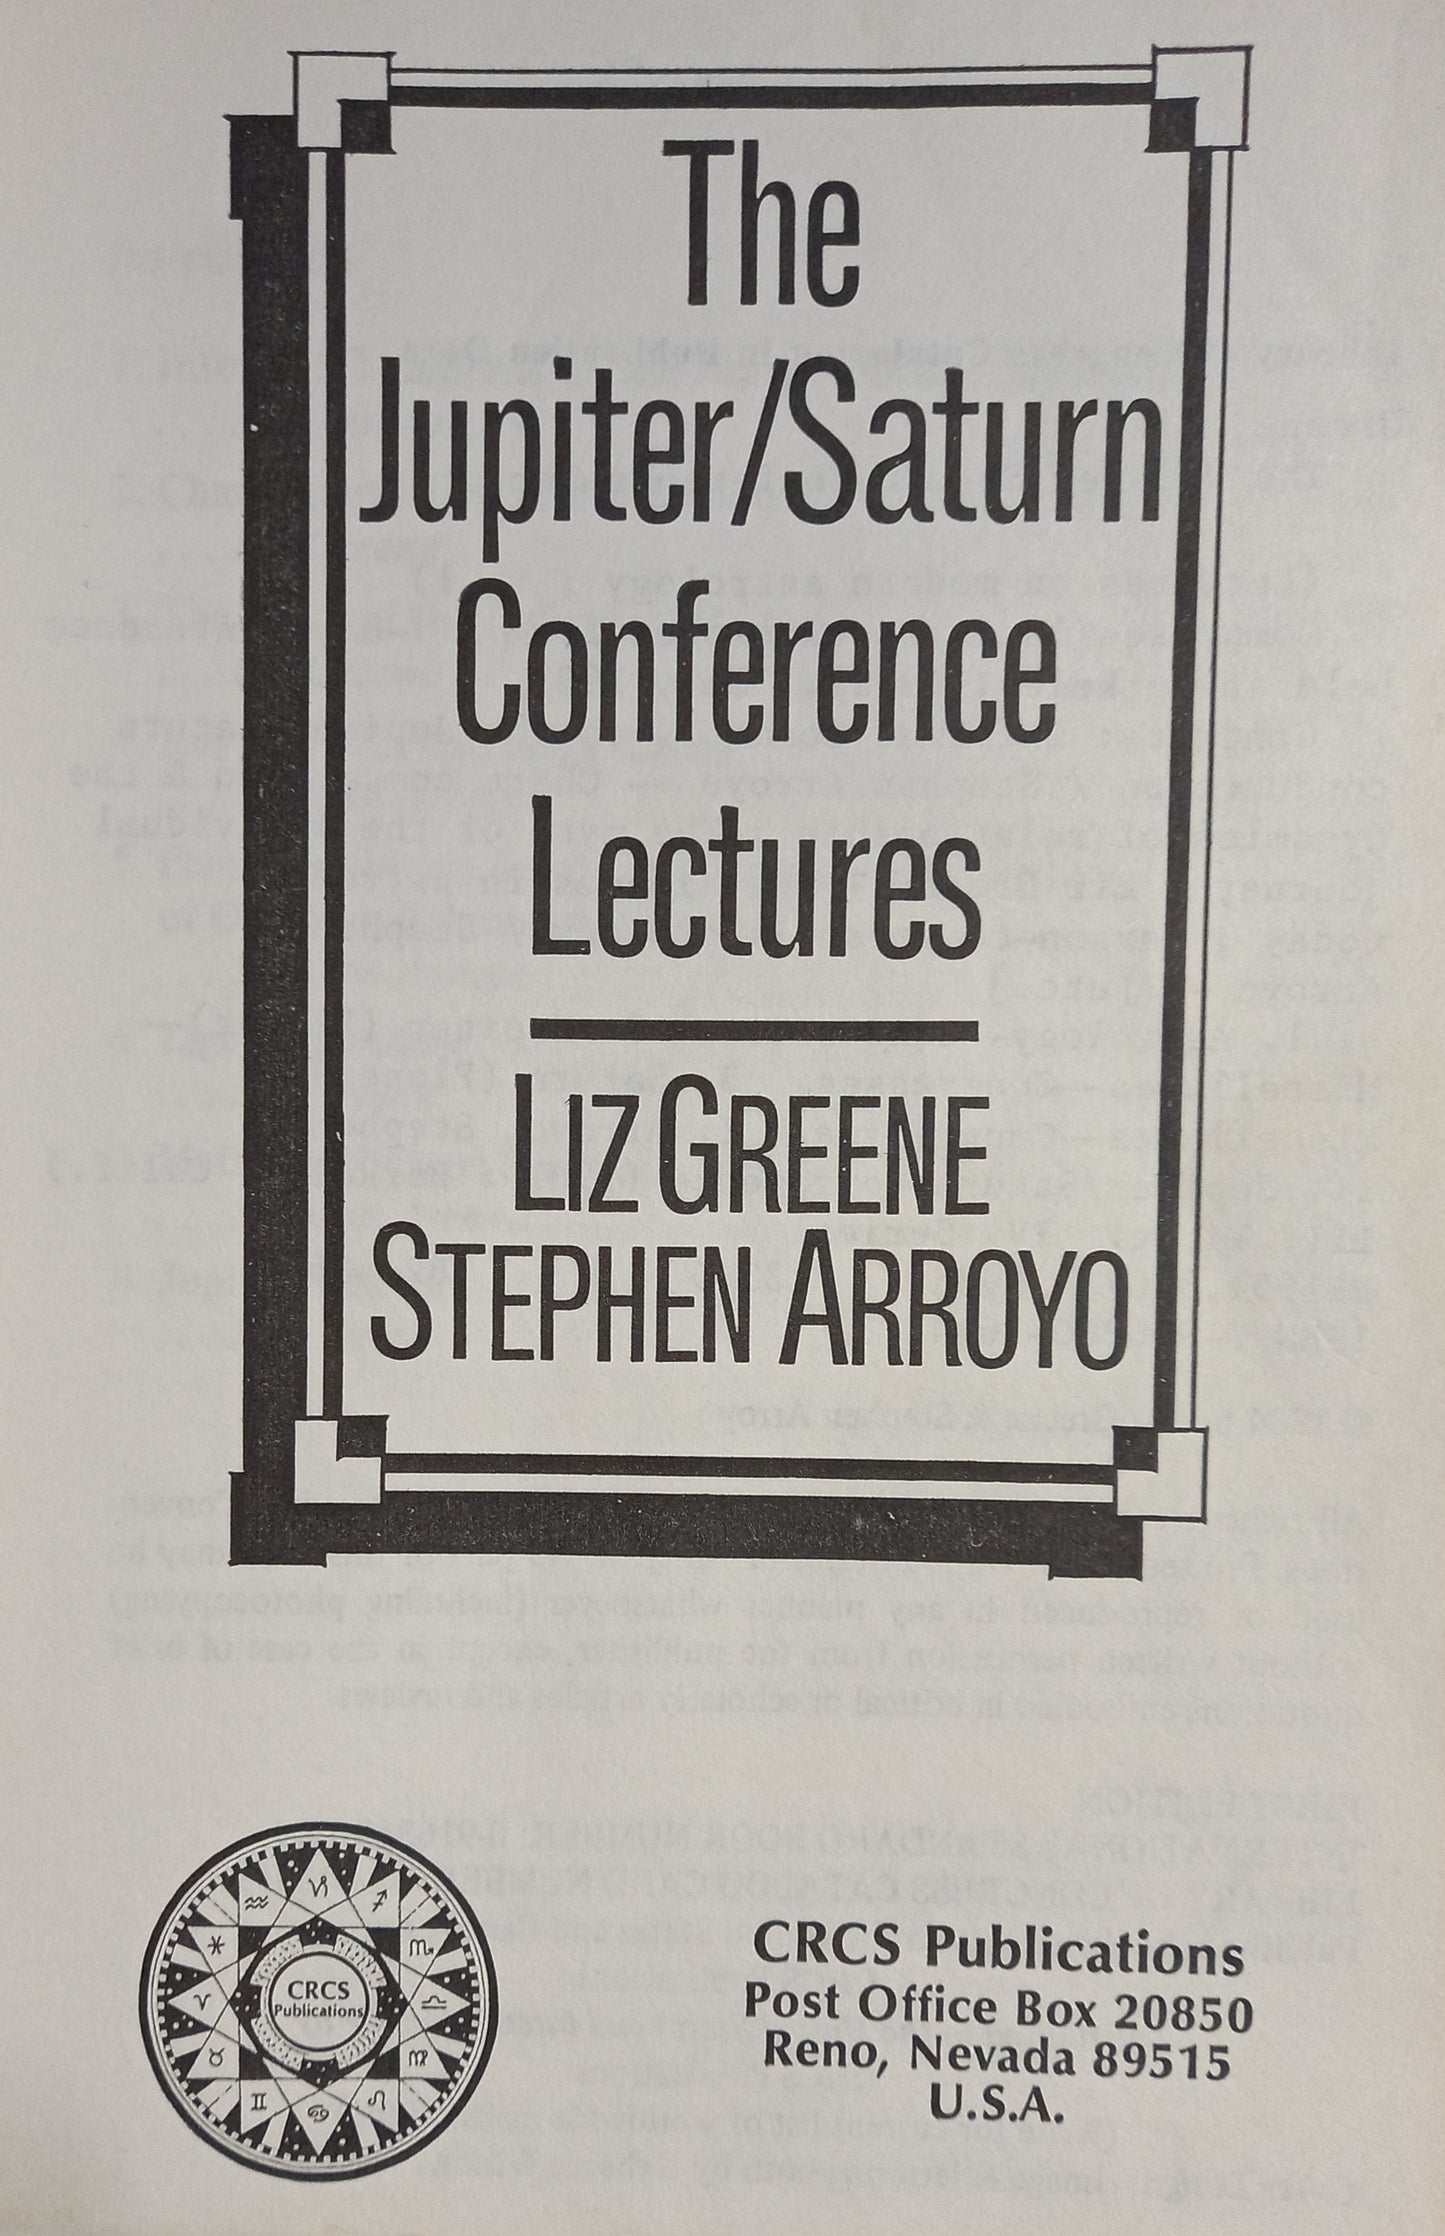 The Jupiter/Saturn Conference Lectures